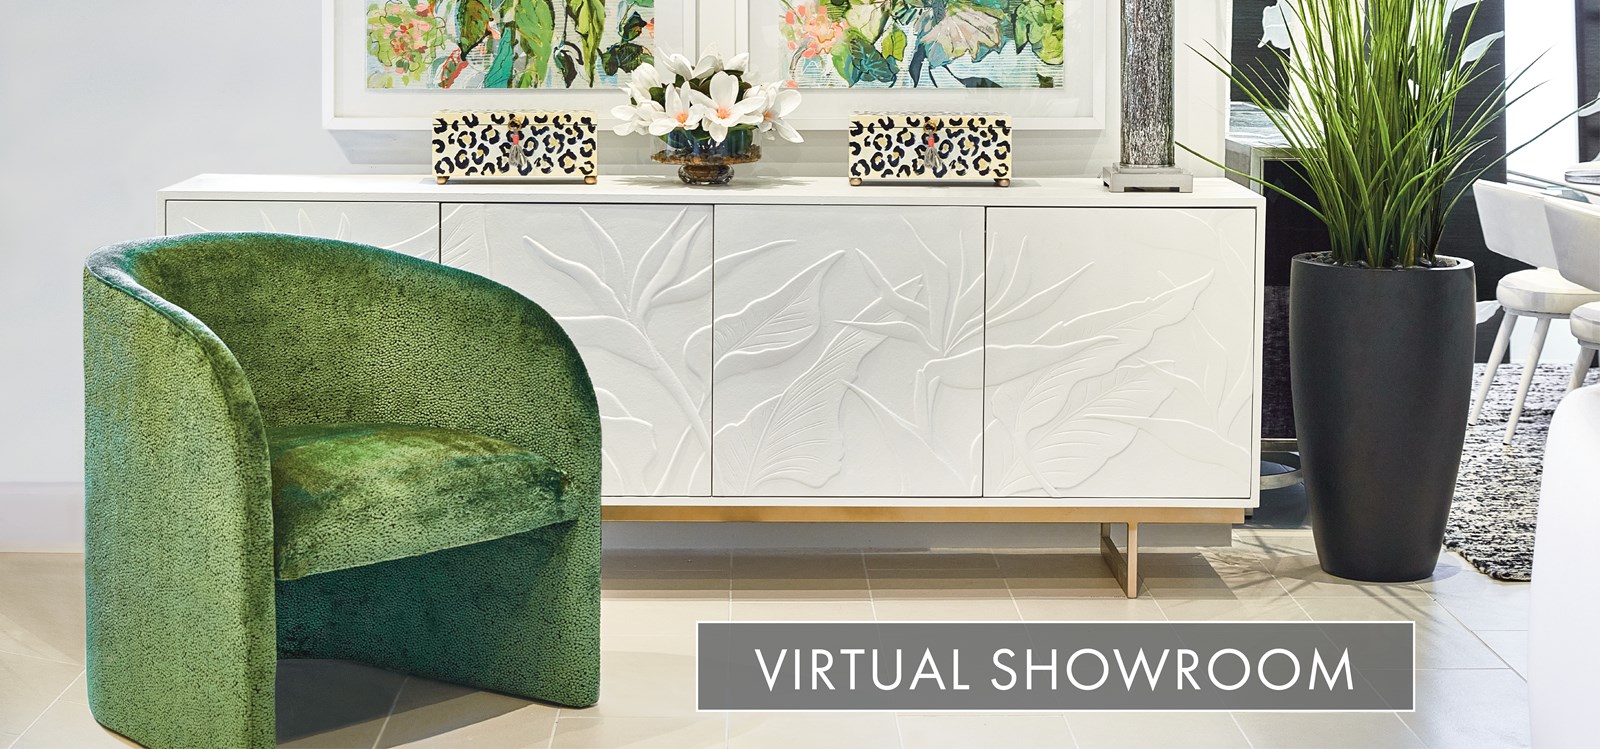 Image of a green accent chair in front of white console with leaf motif in Naples Showroom. Text: Virtual Showroom. Links to Virtual Showroom.